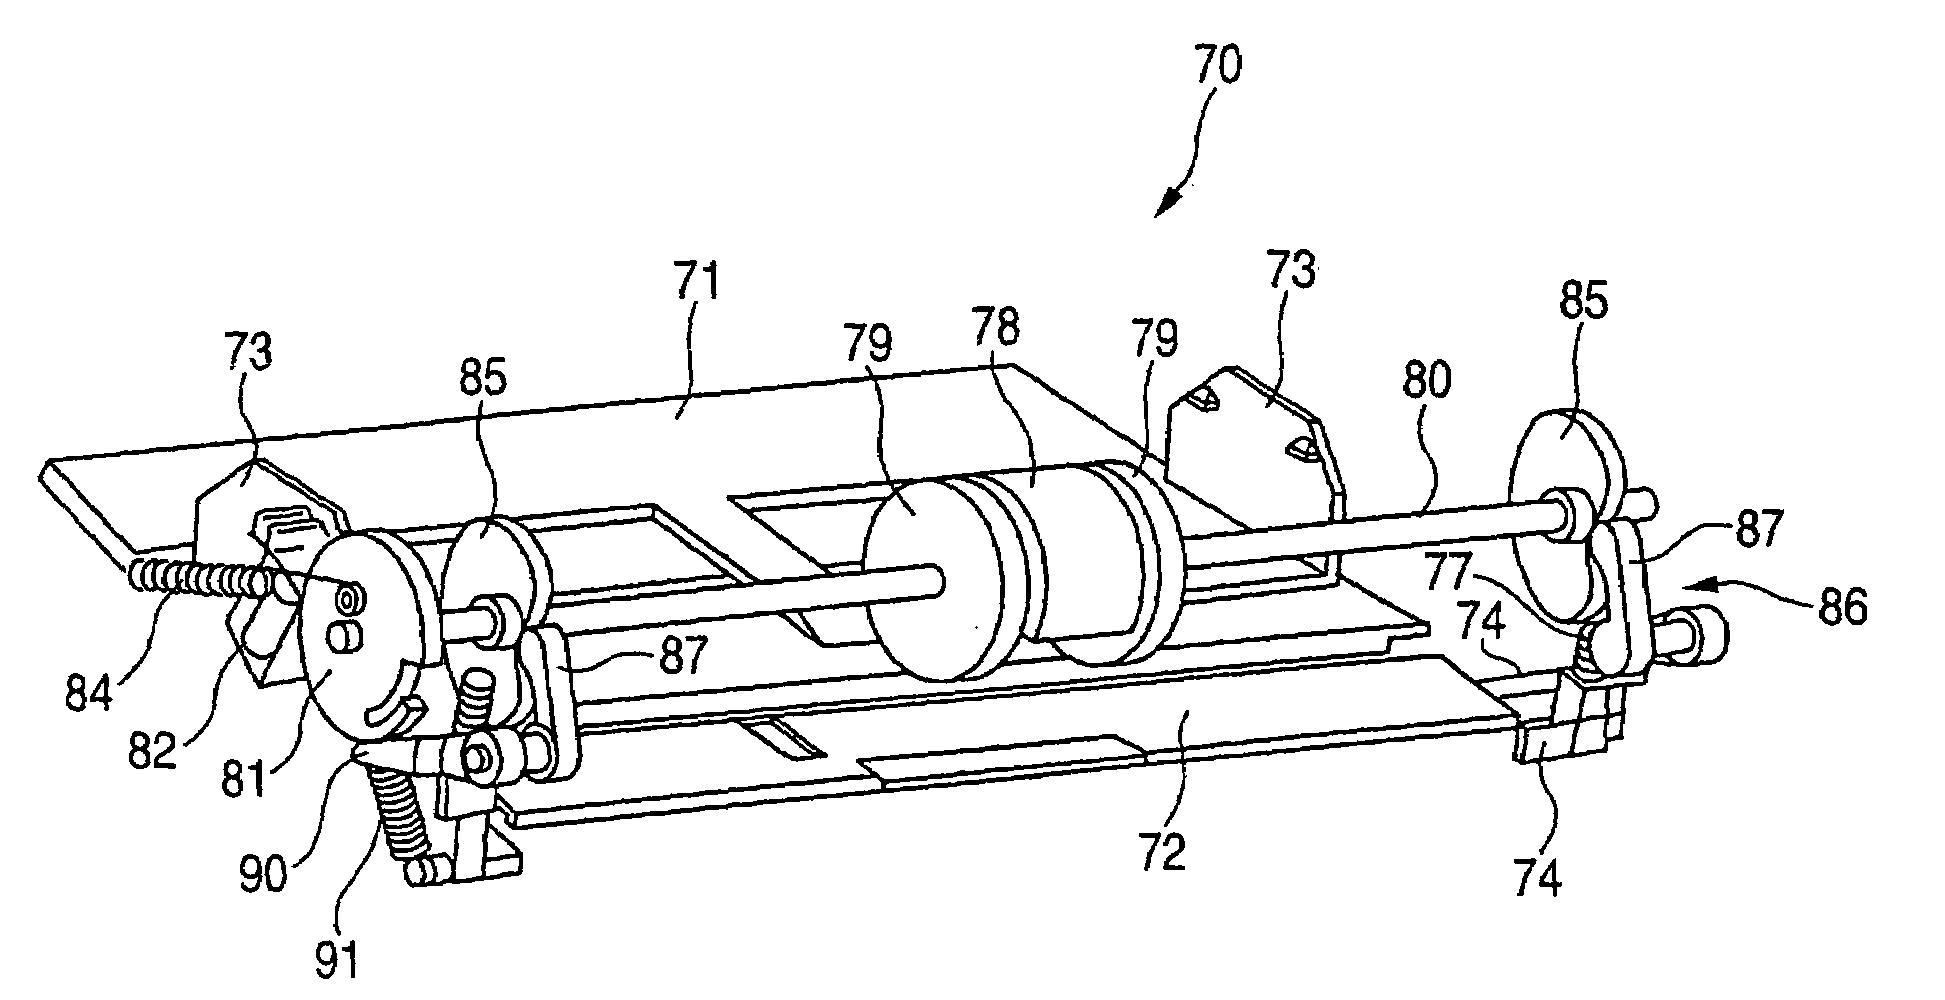 Sheet feeding device with two cams